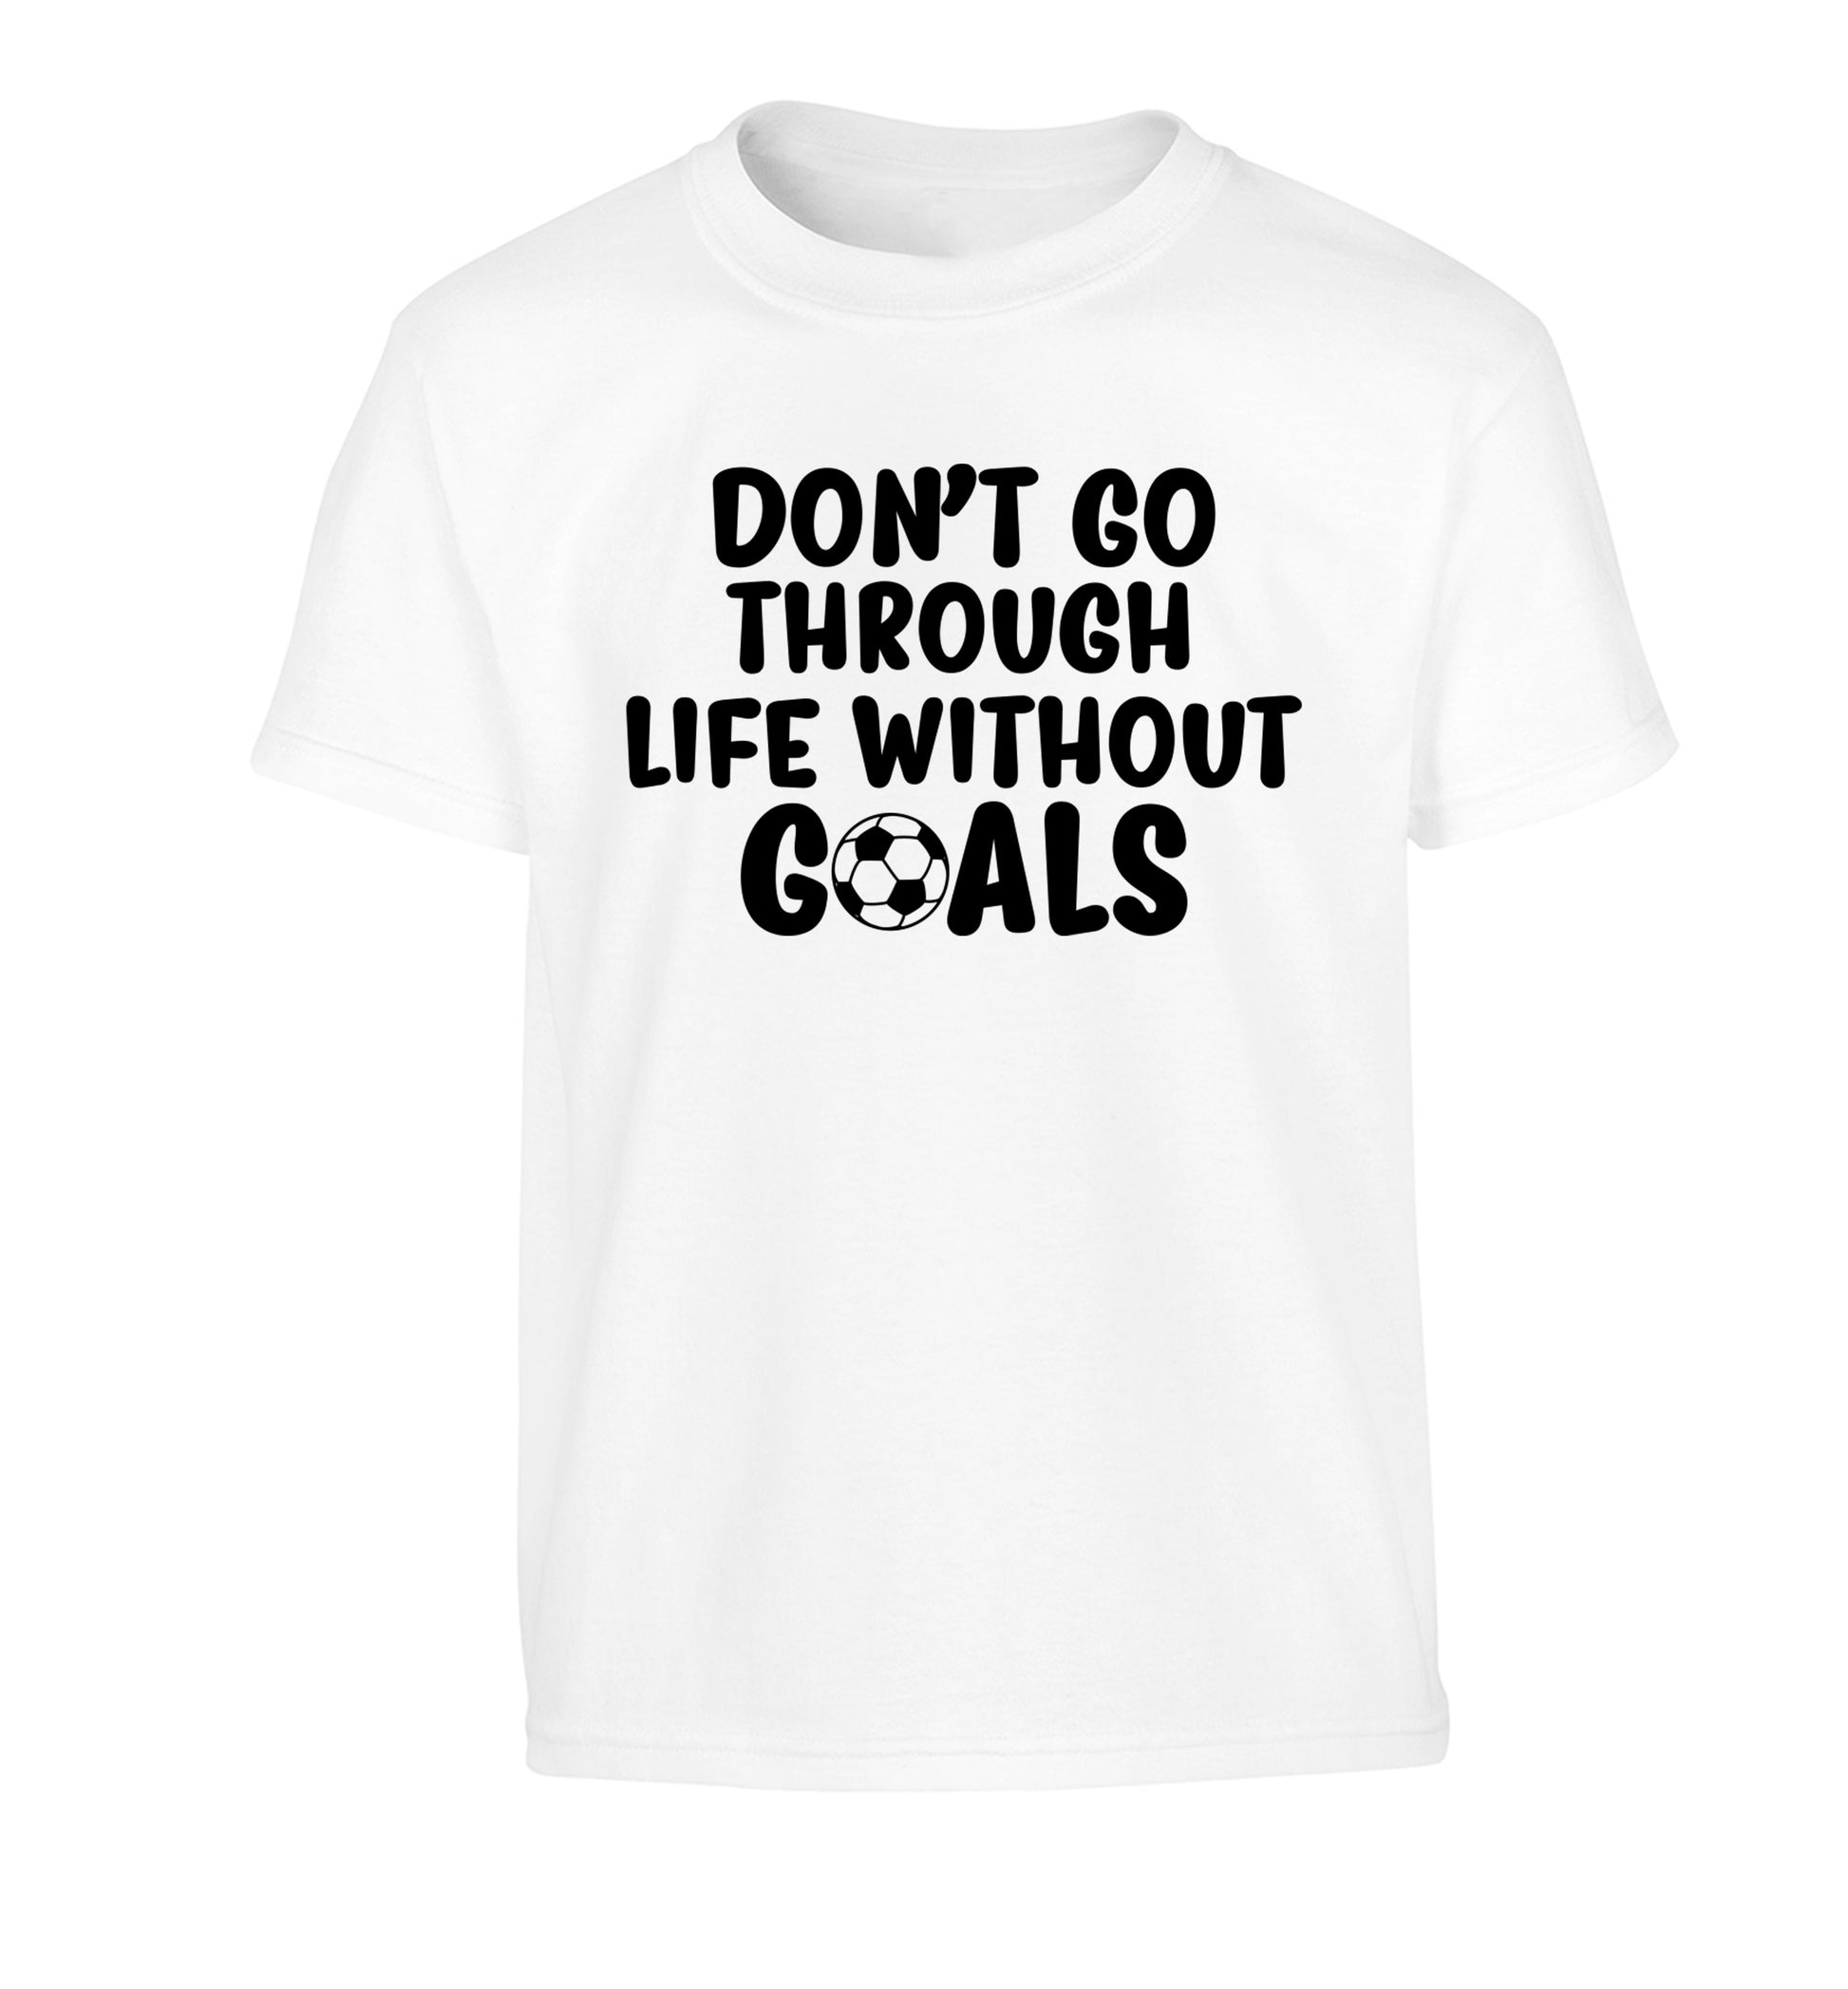 Don't go through life without goals Children's white Tshirt 12-14 Years